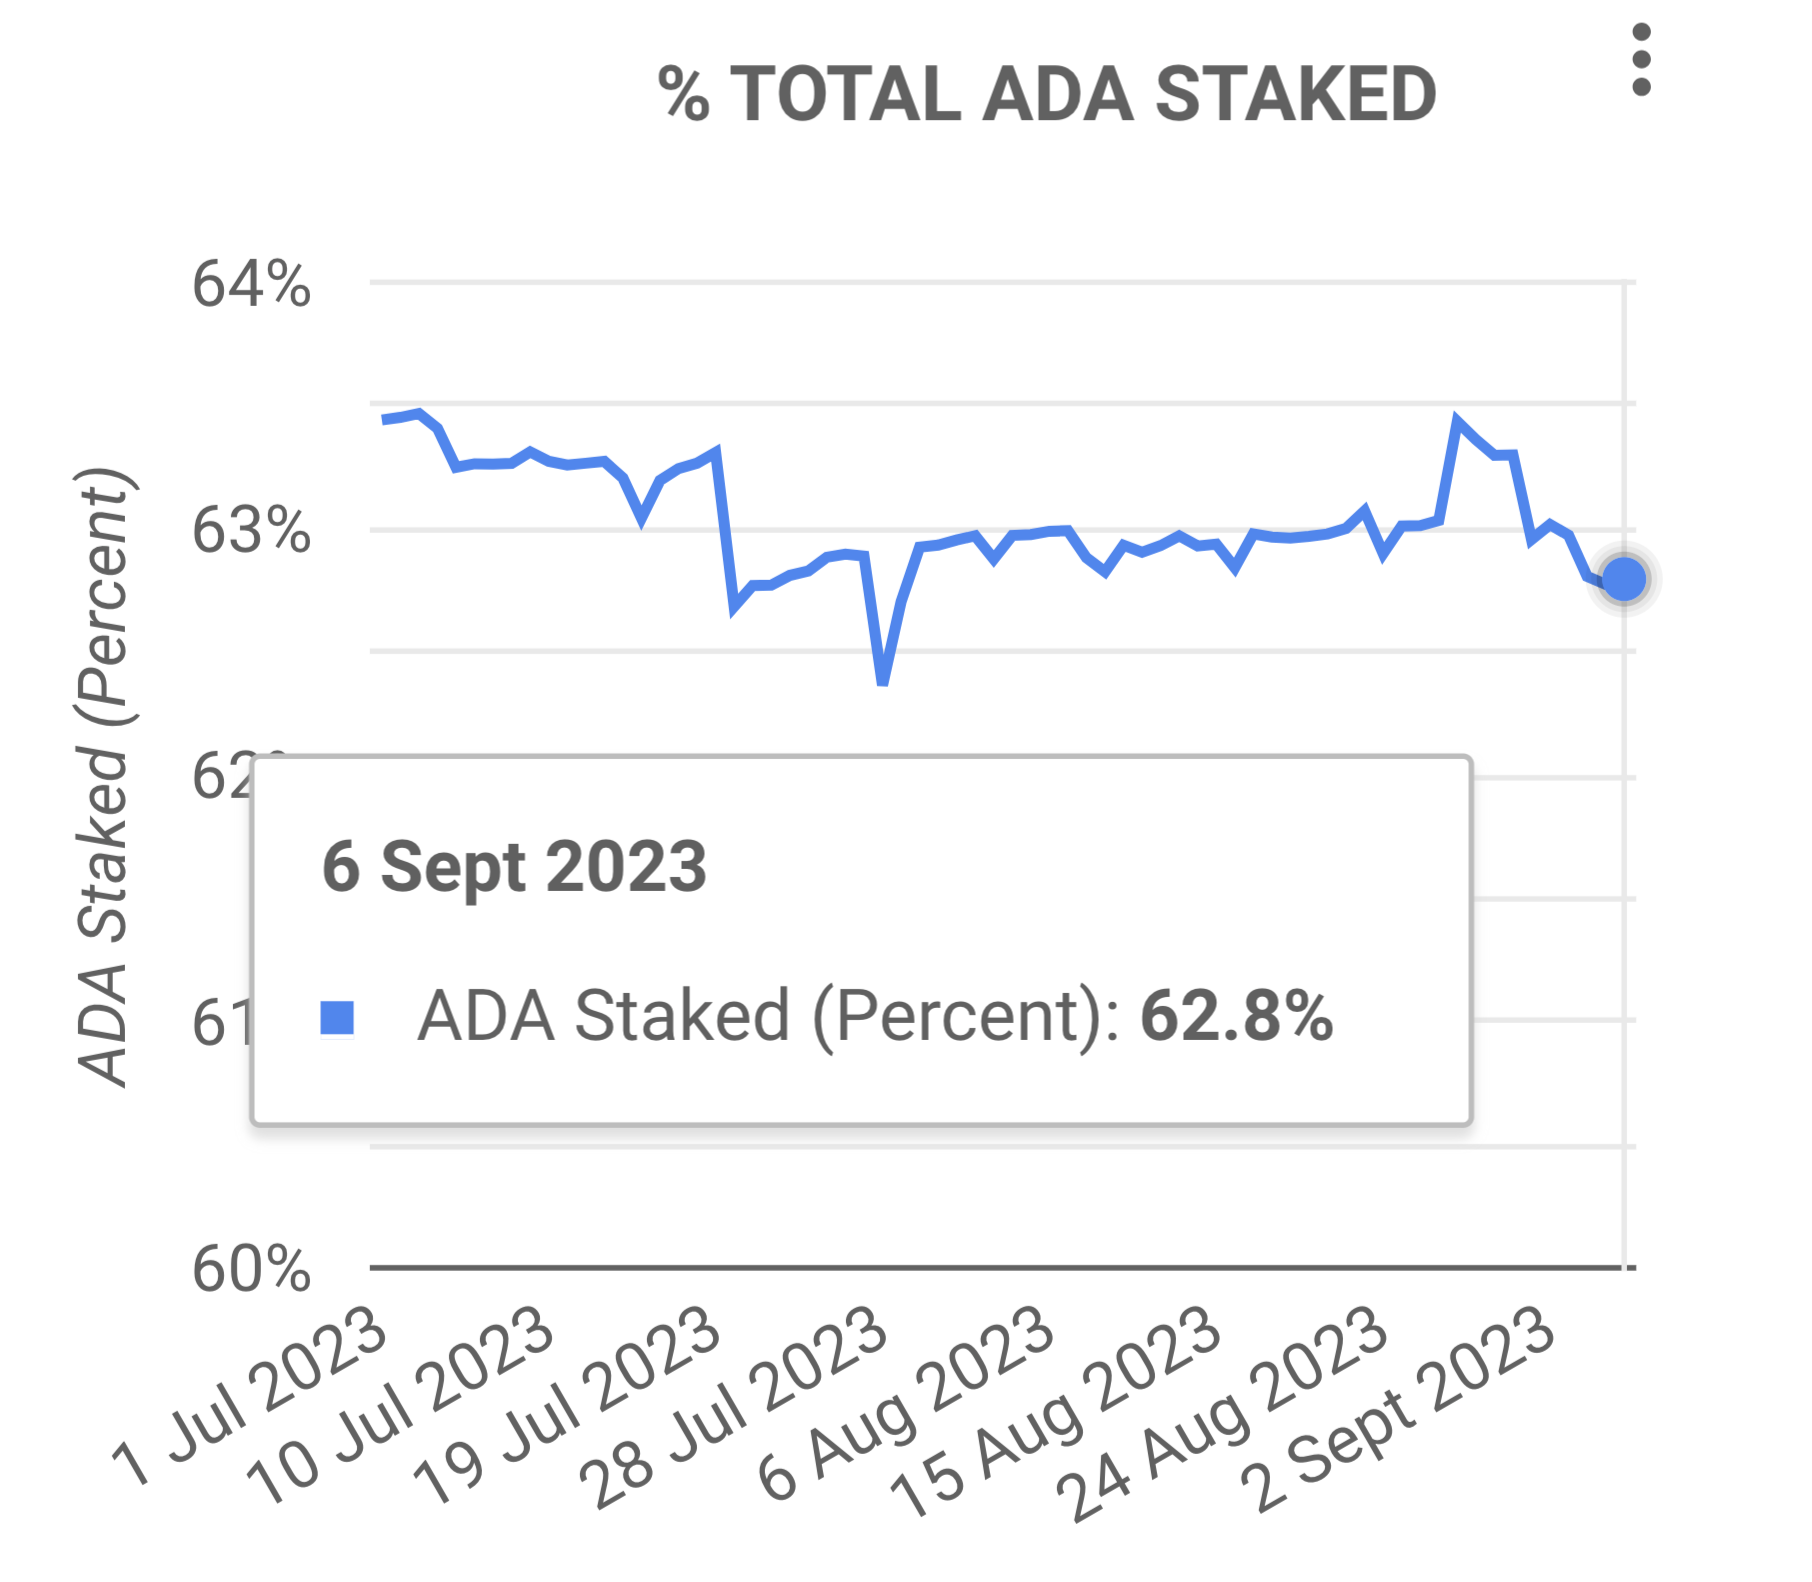 Will Cardano (ADA) Could Price Hold $0.25 | Total ADA Staked Sept 2023